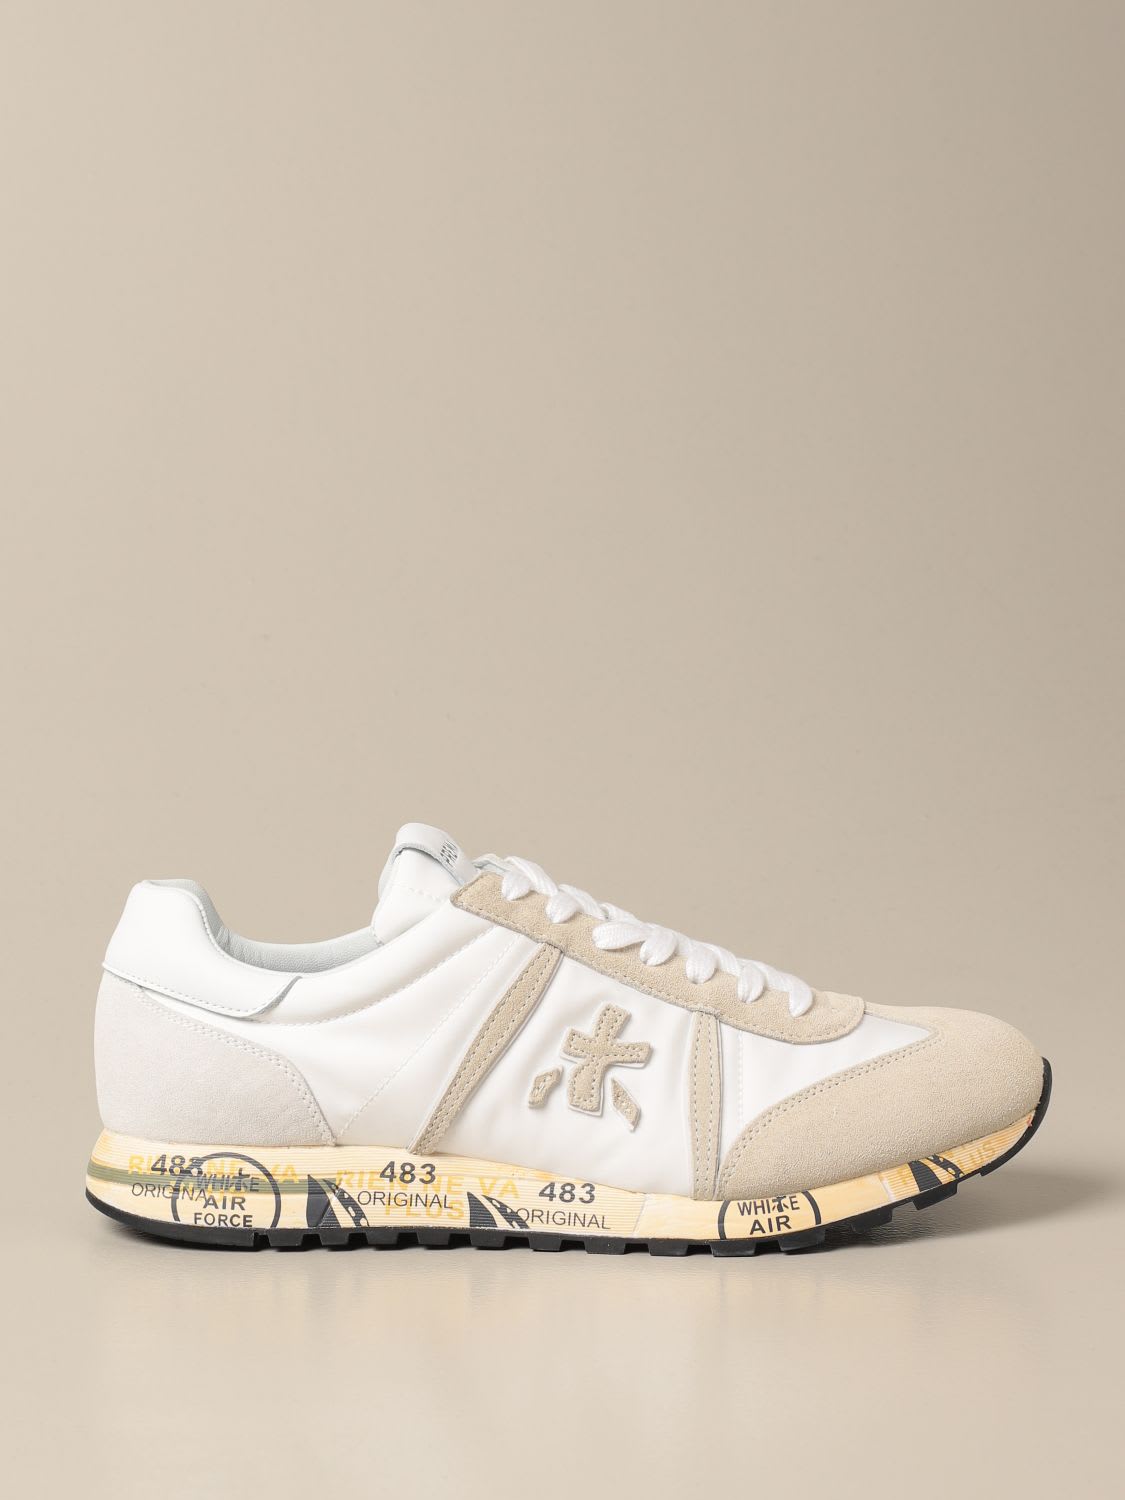 Premiata Sneakers Lucy Premiata Sneakers In Leather And Nylon Suede